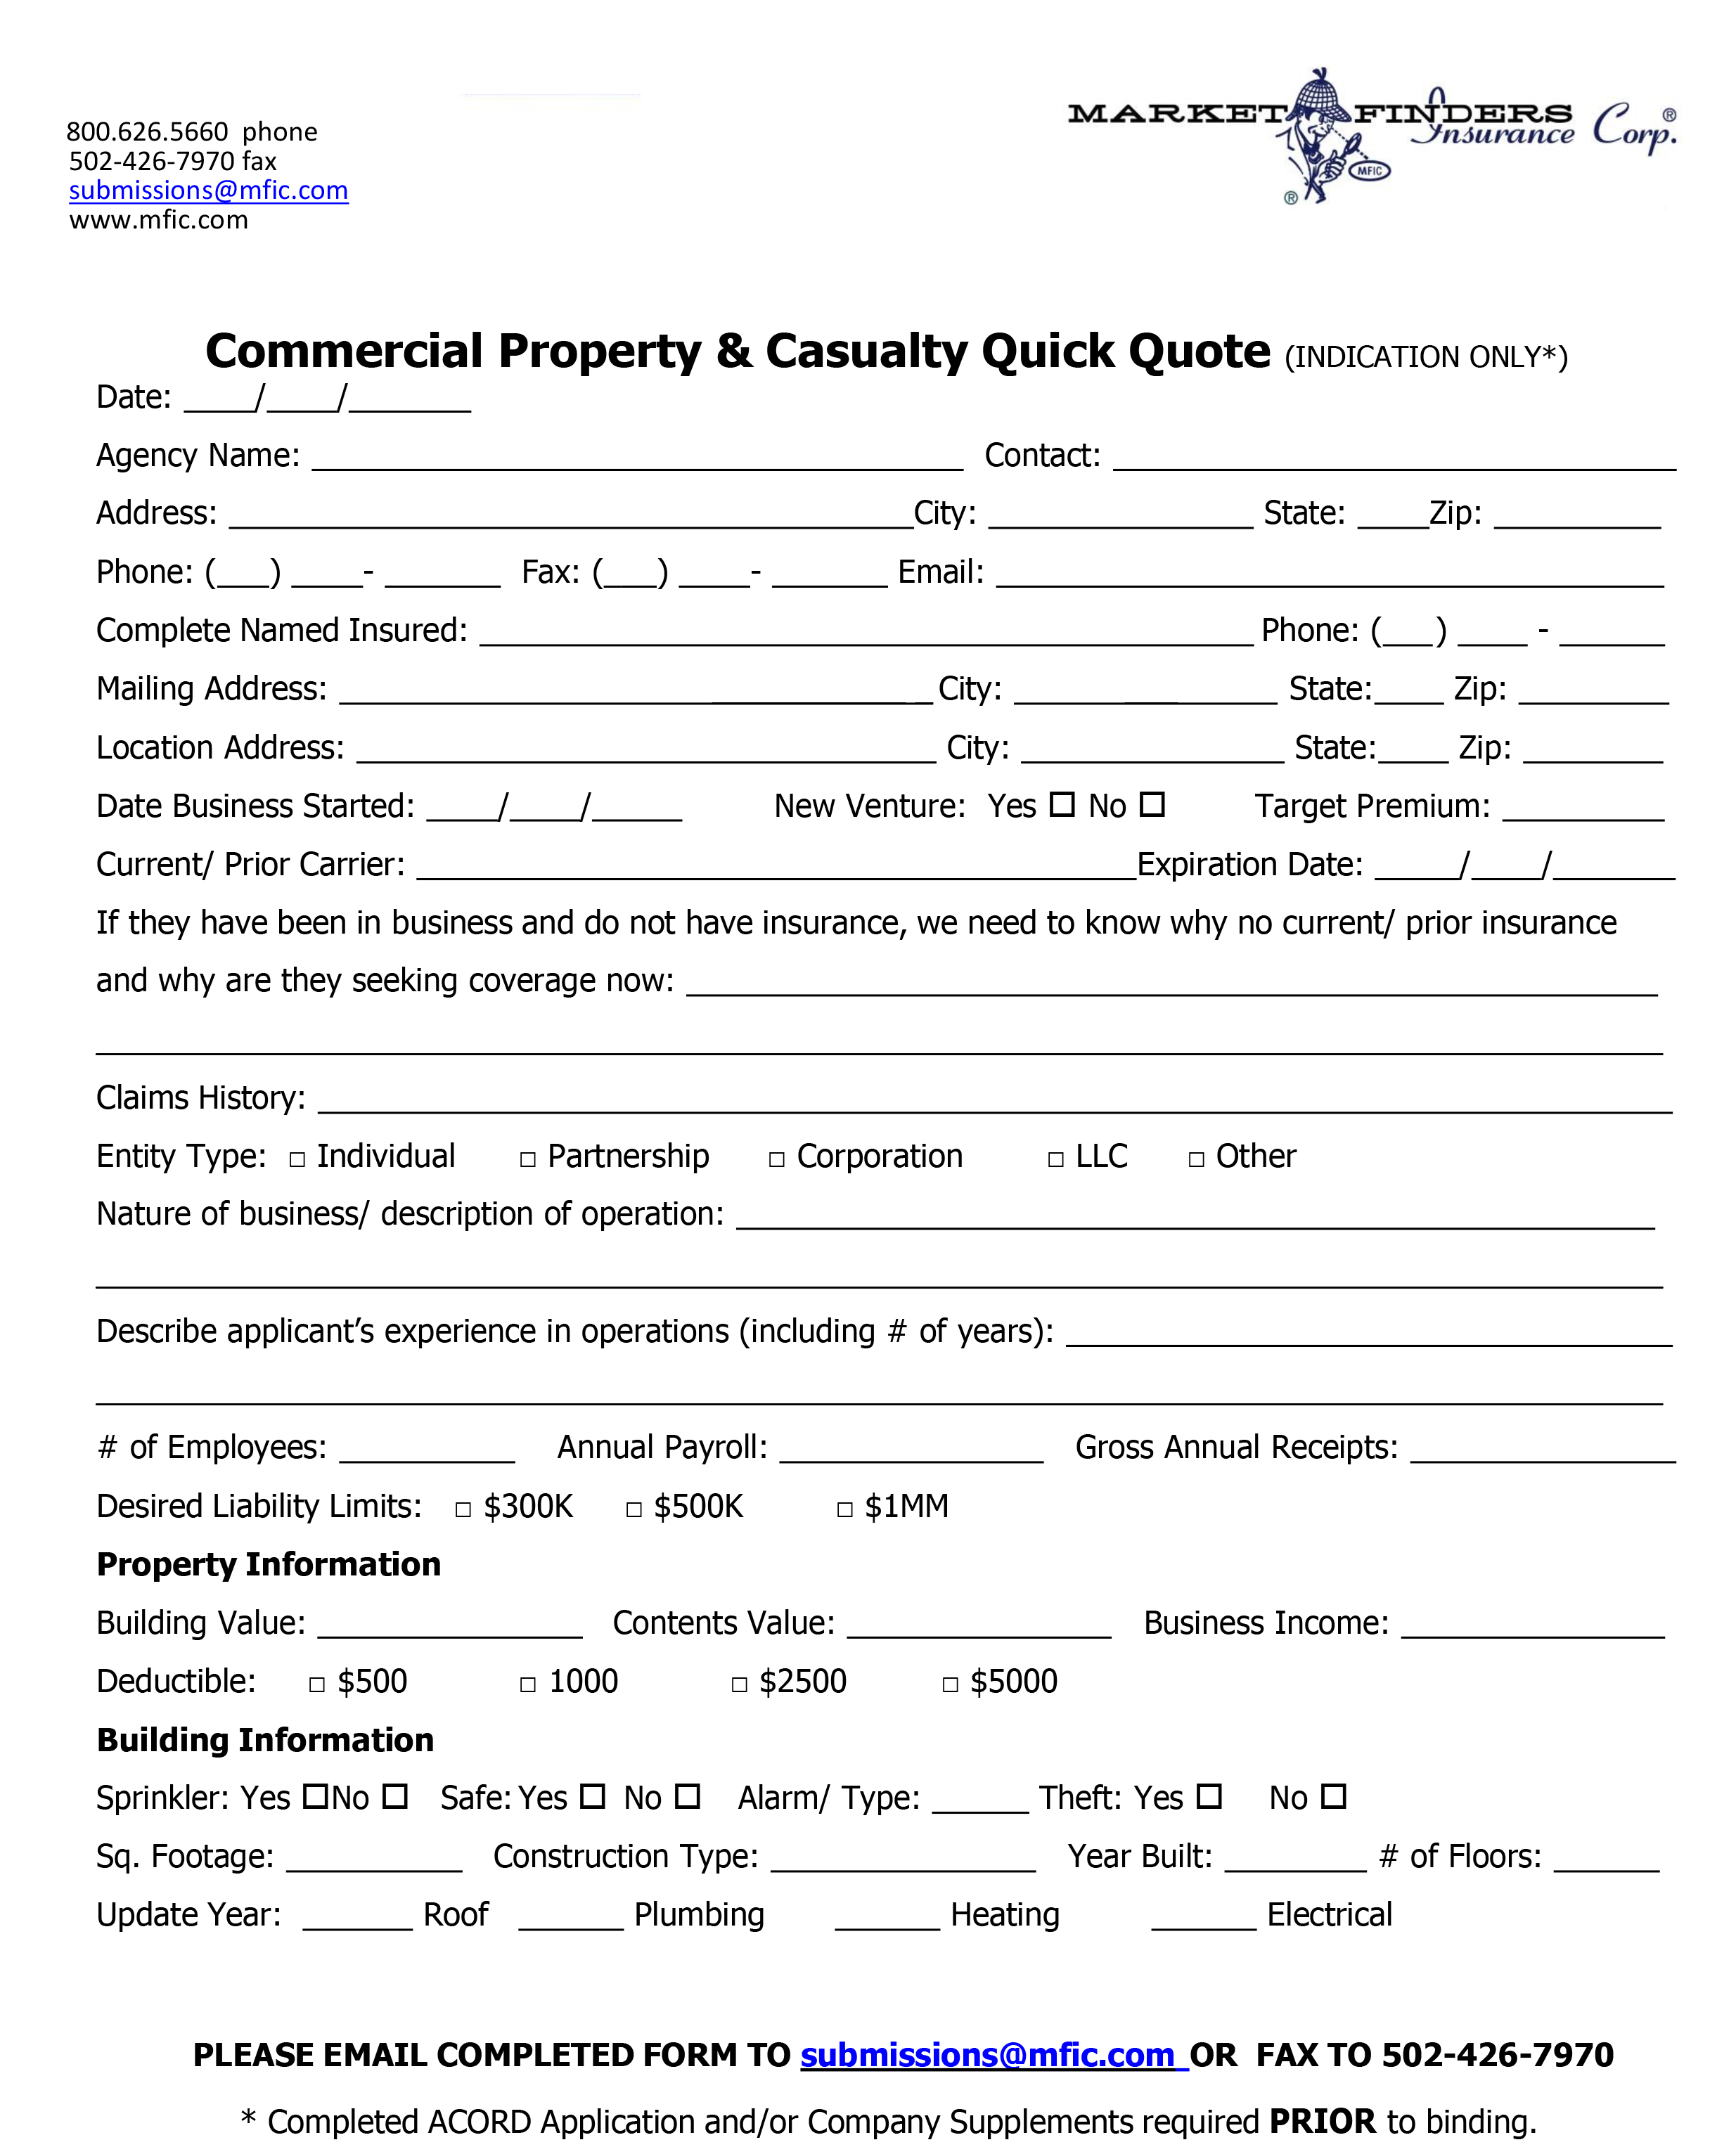 commercialpropertyquickquote Market Finders Insurance Corp